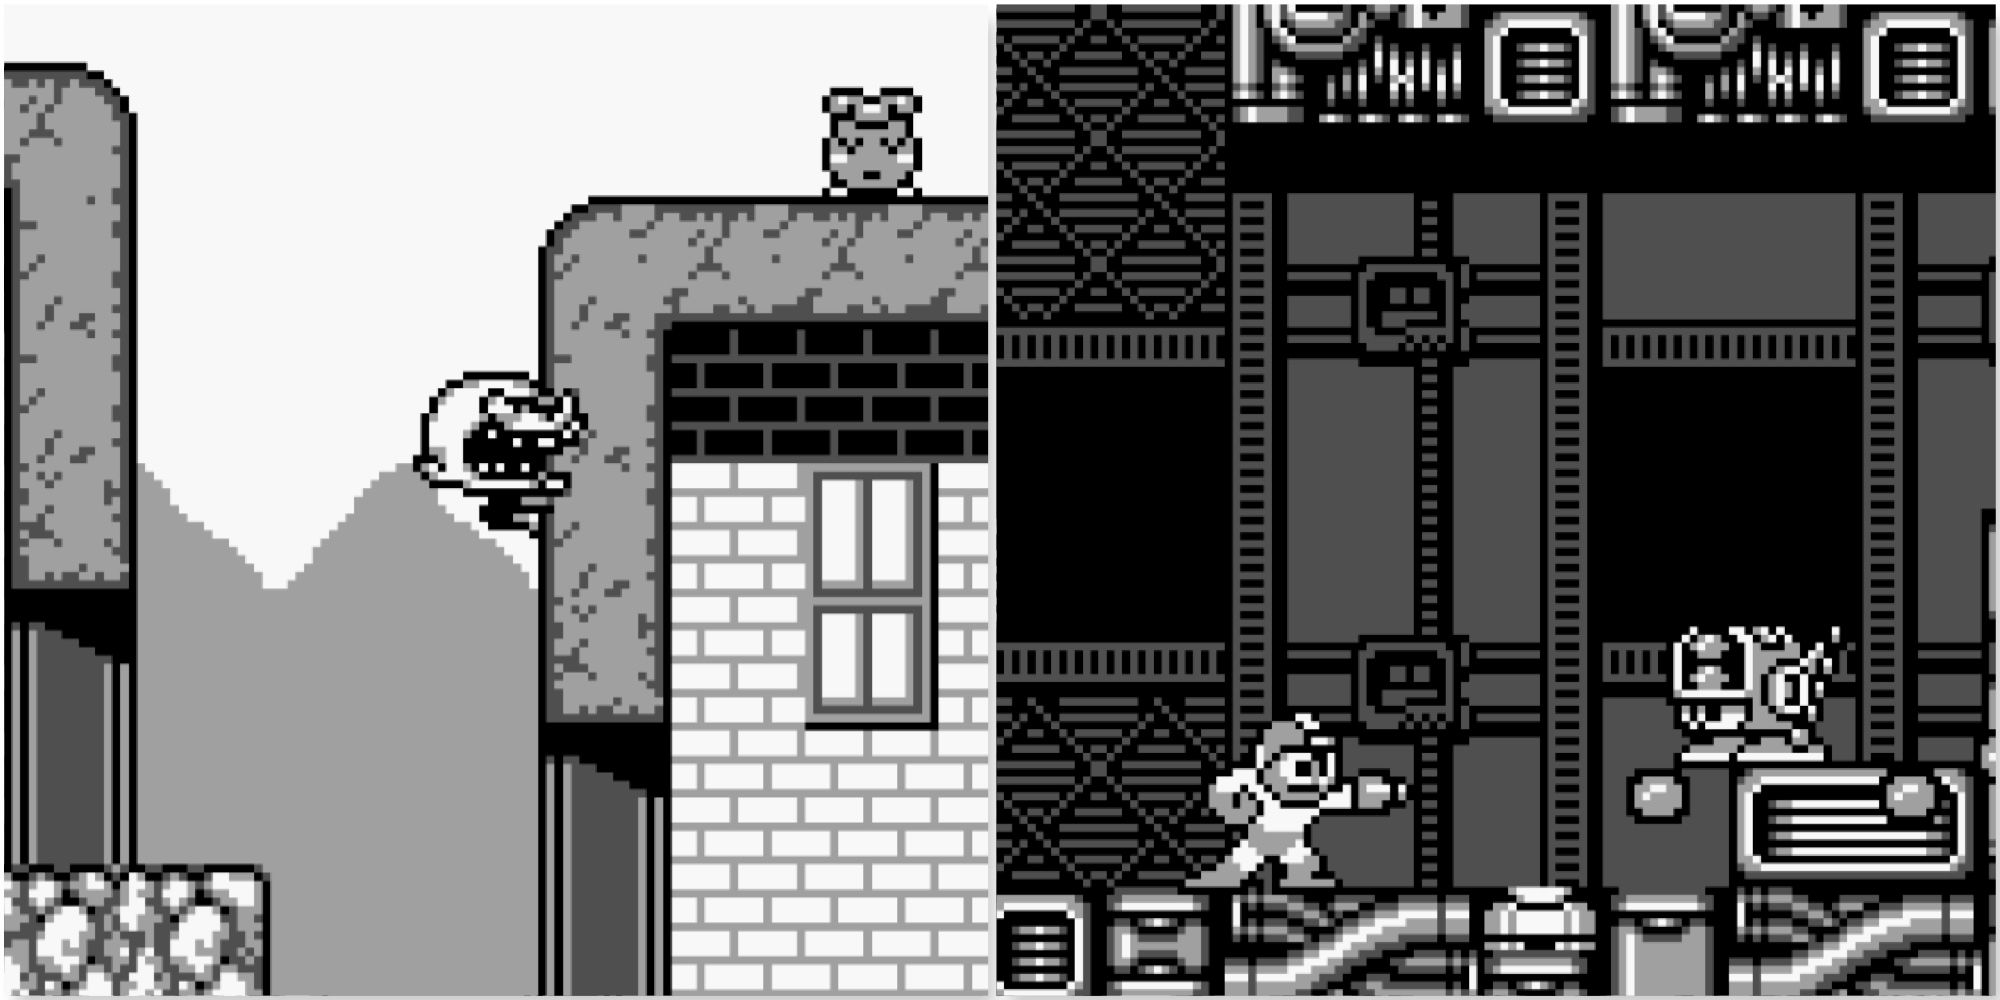 Climbing a wall in Bonk’s Revenge and shooting enemies in Mega Man 5